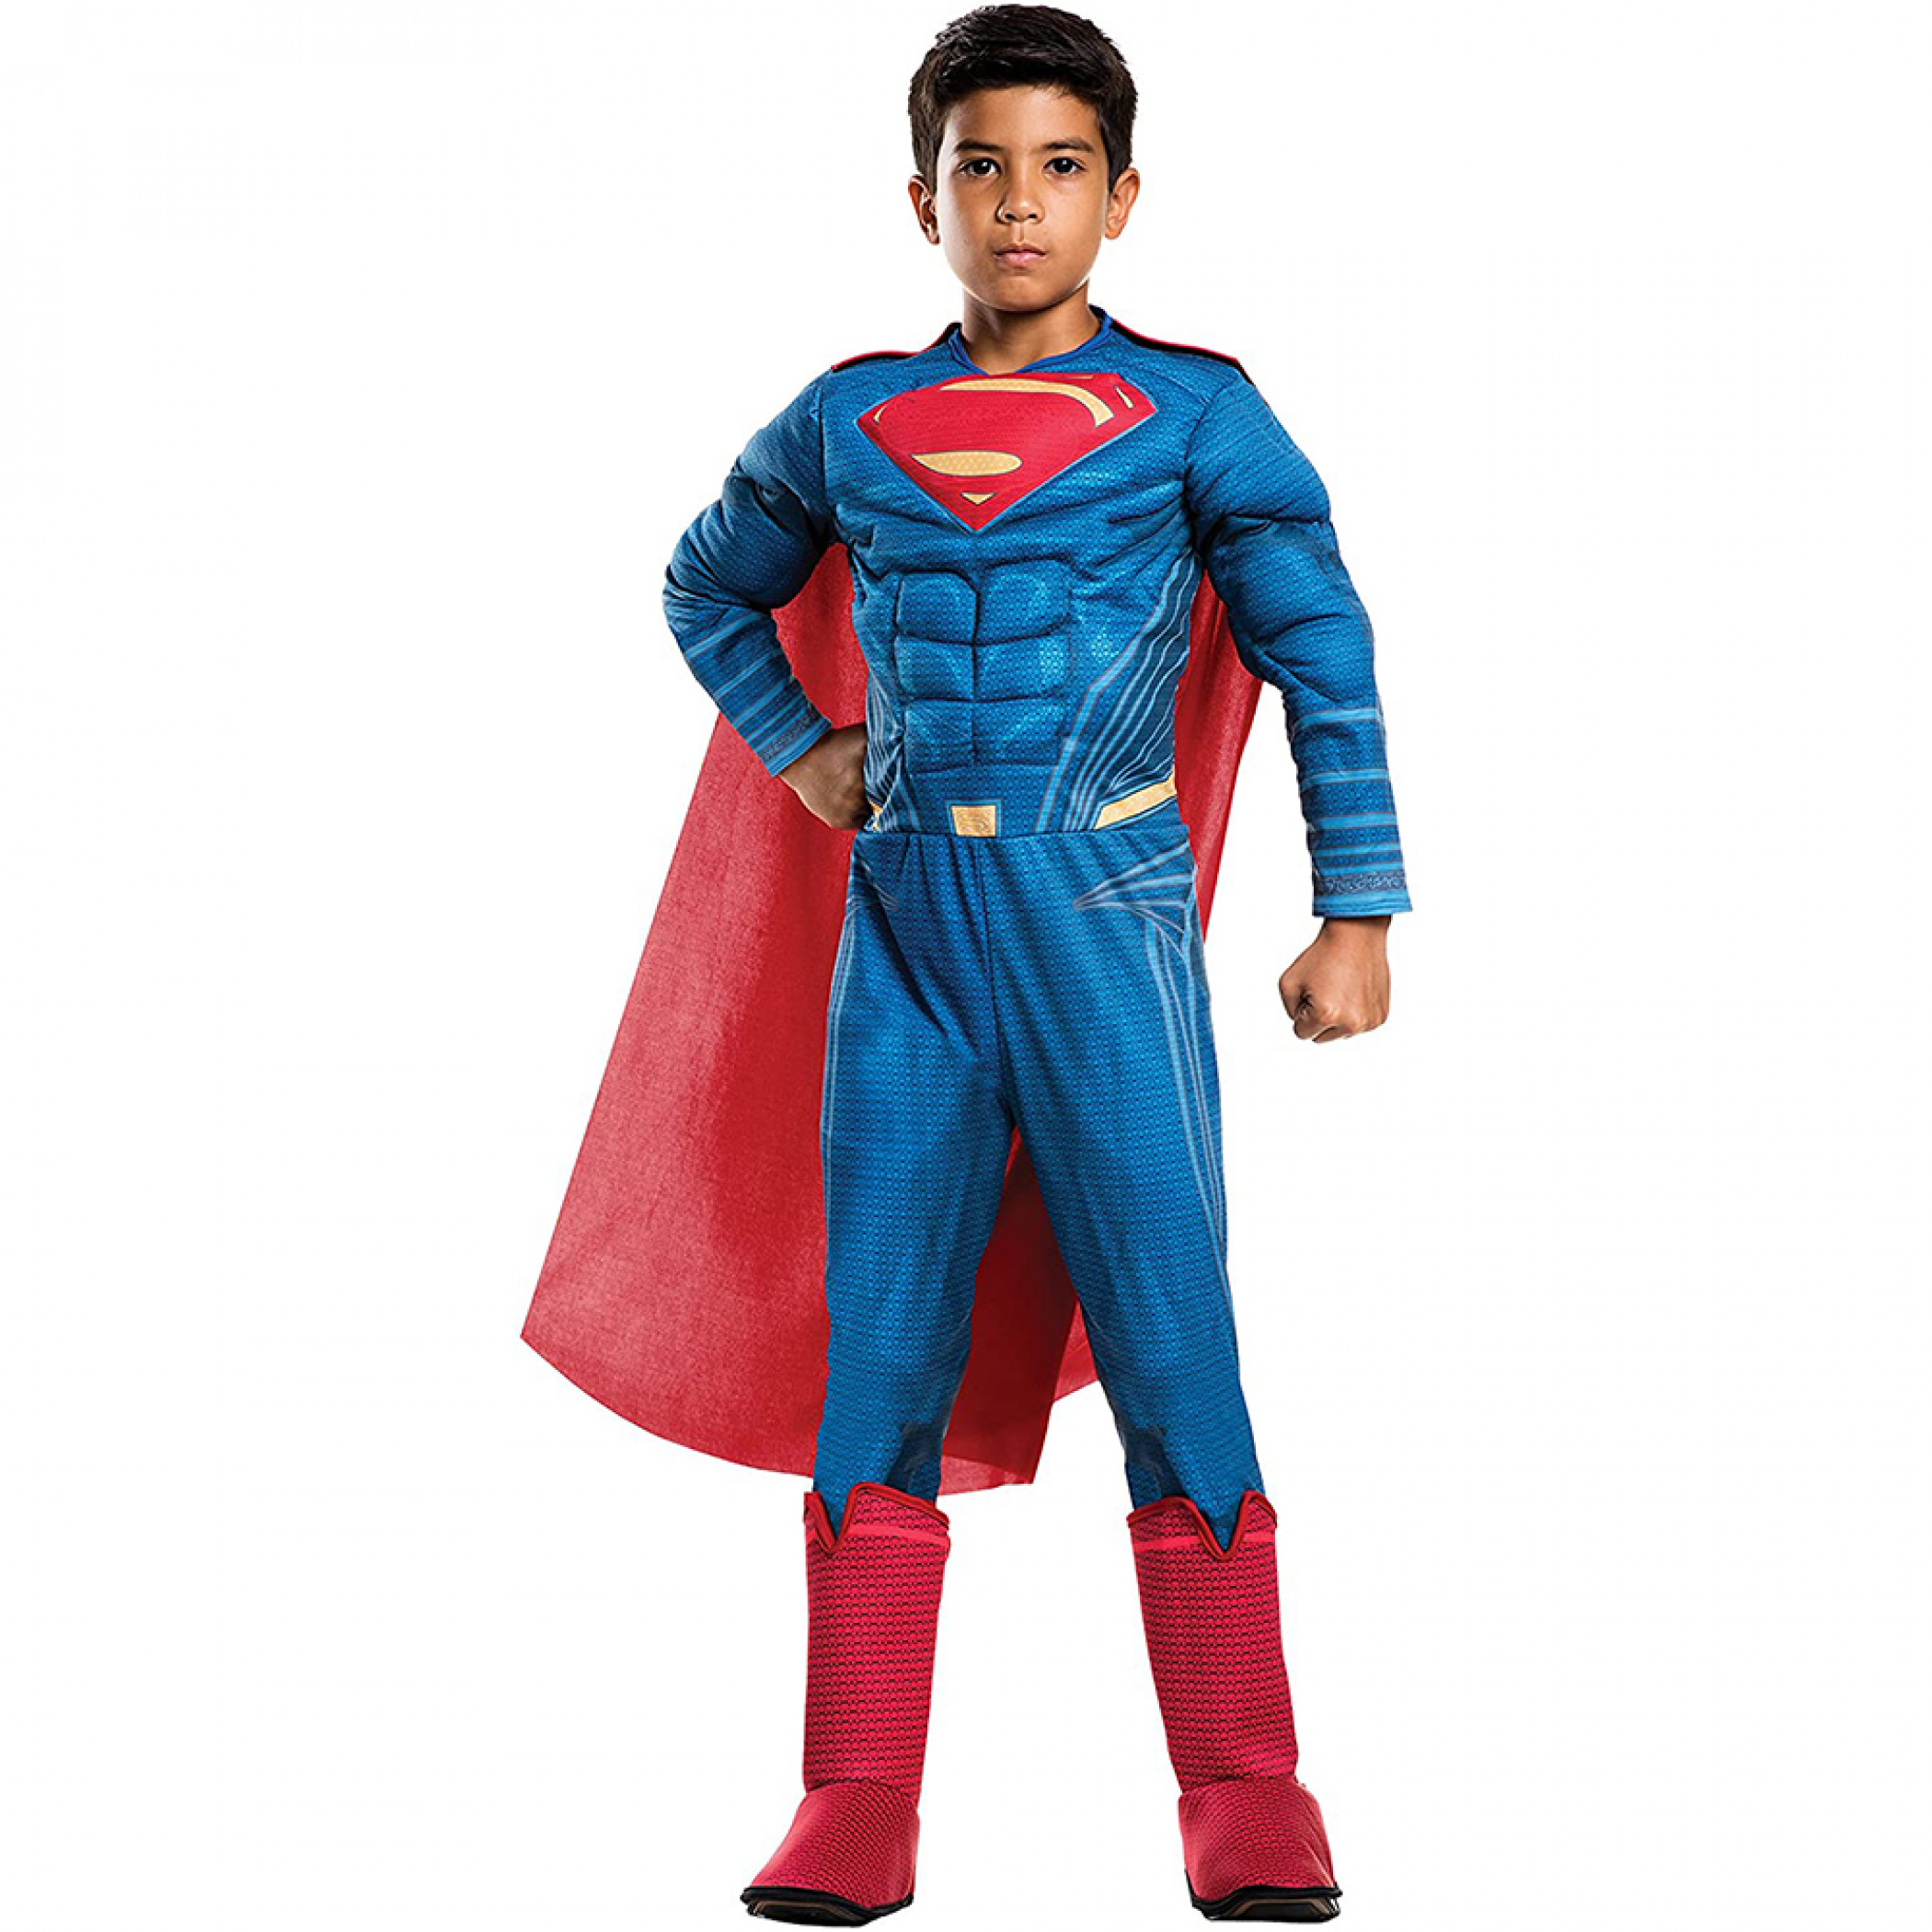 DC Comics Justice League Superman Deluxe Youth Costume